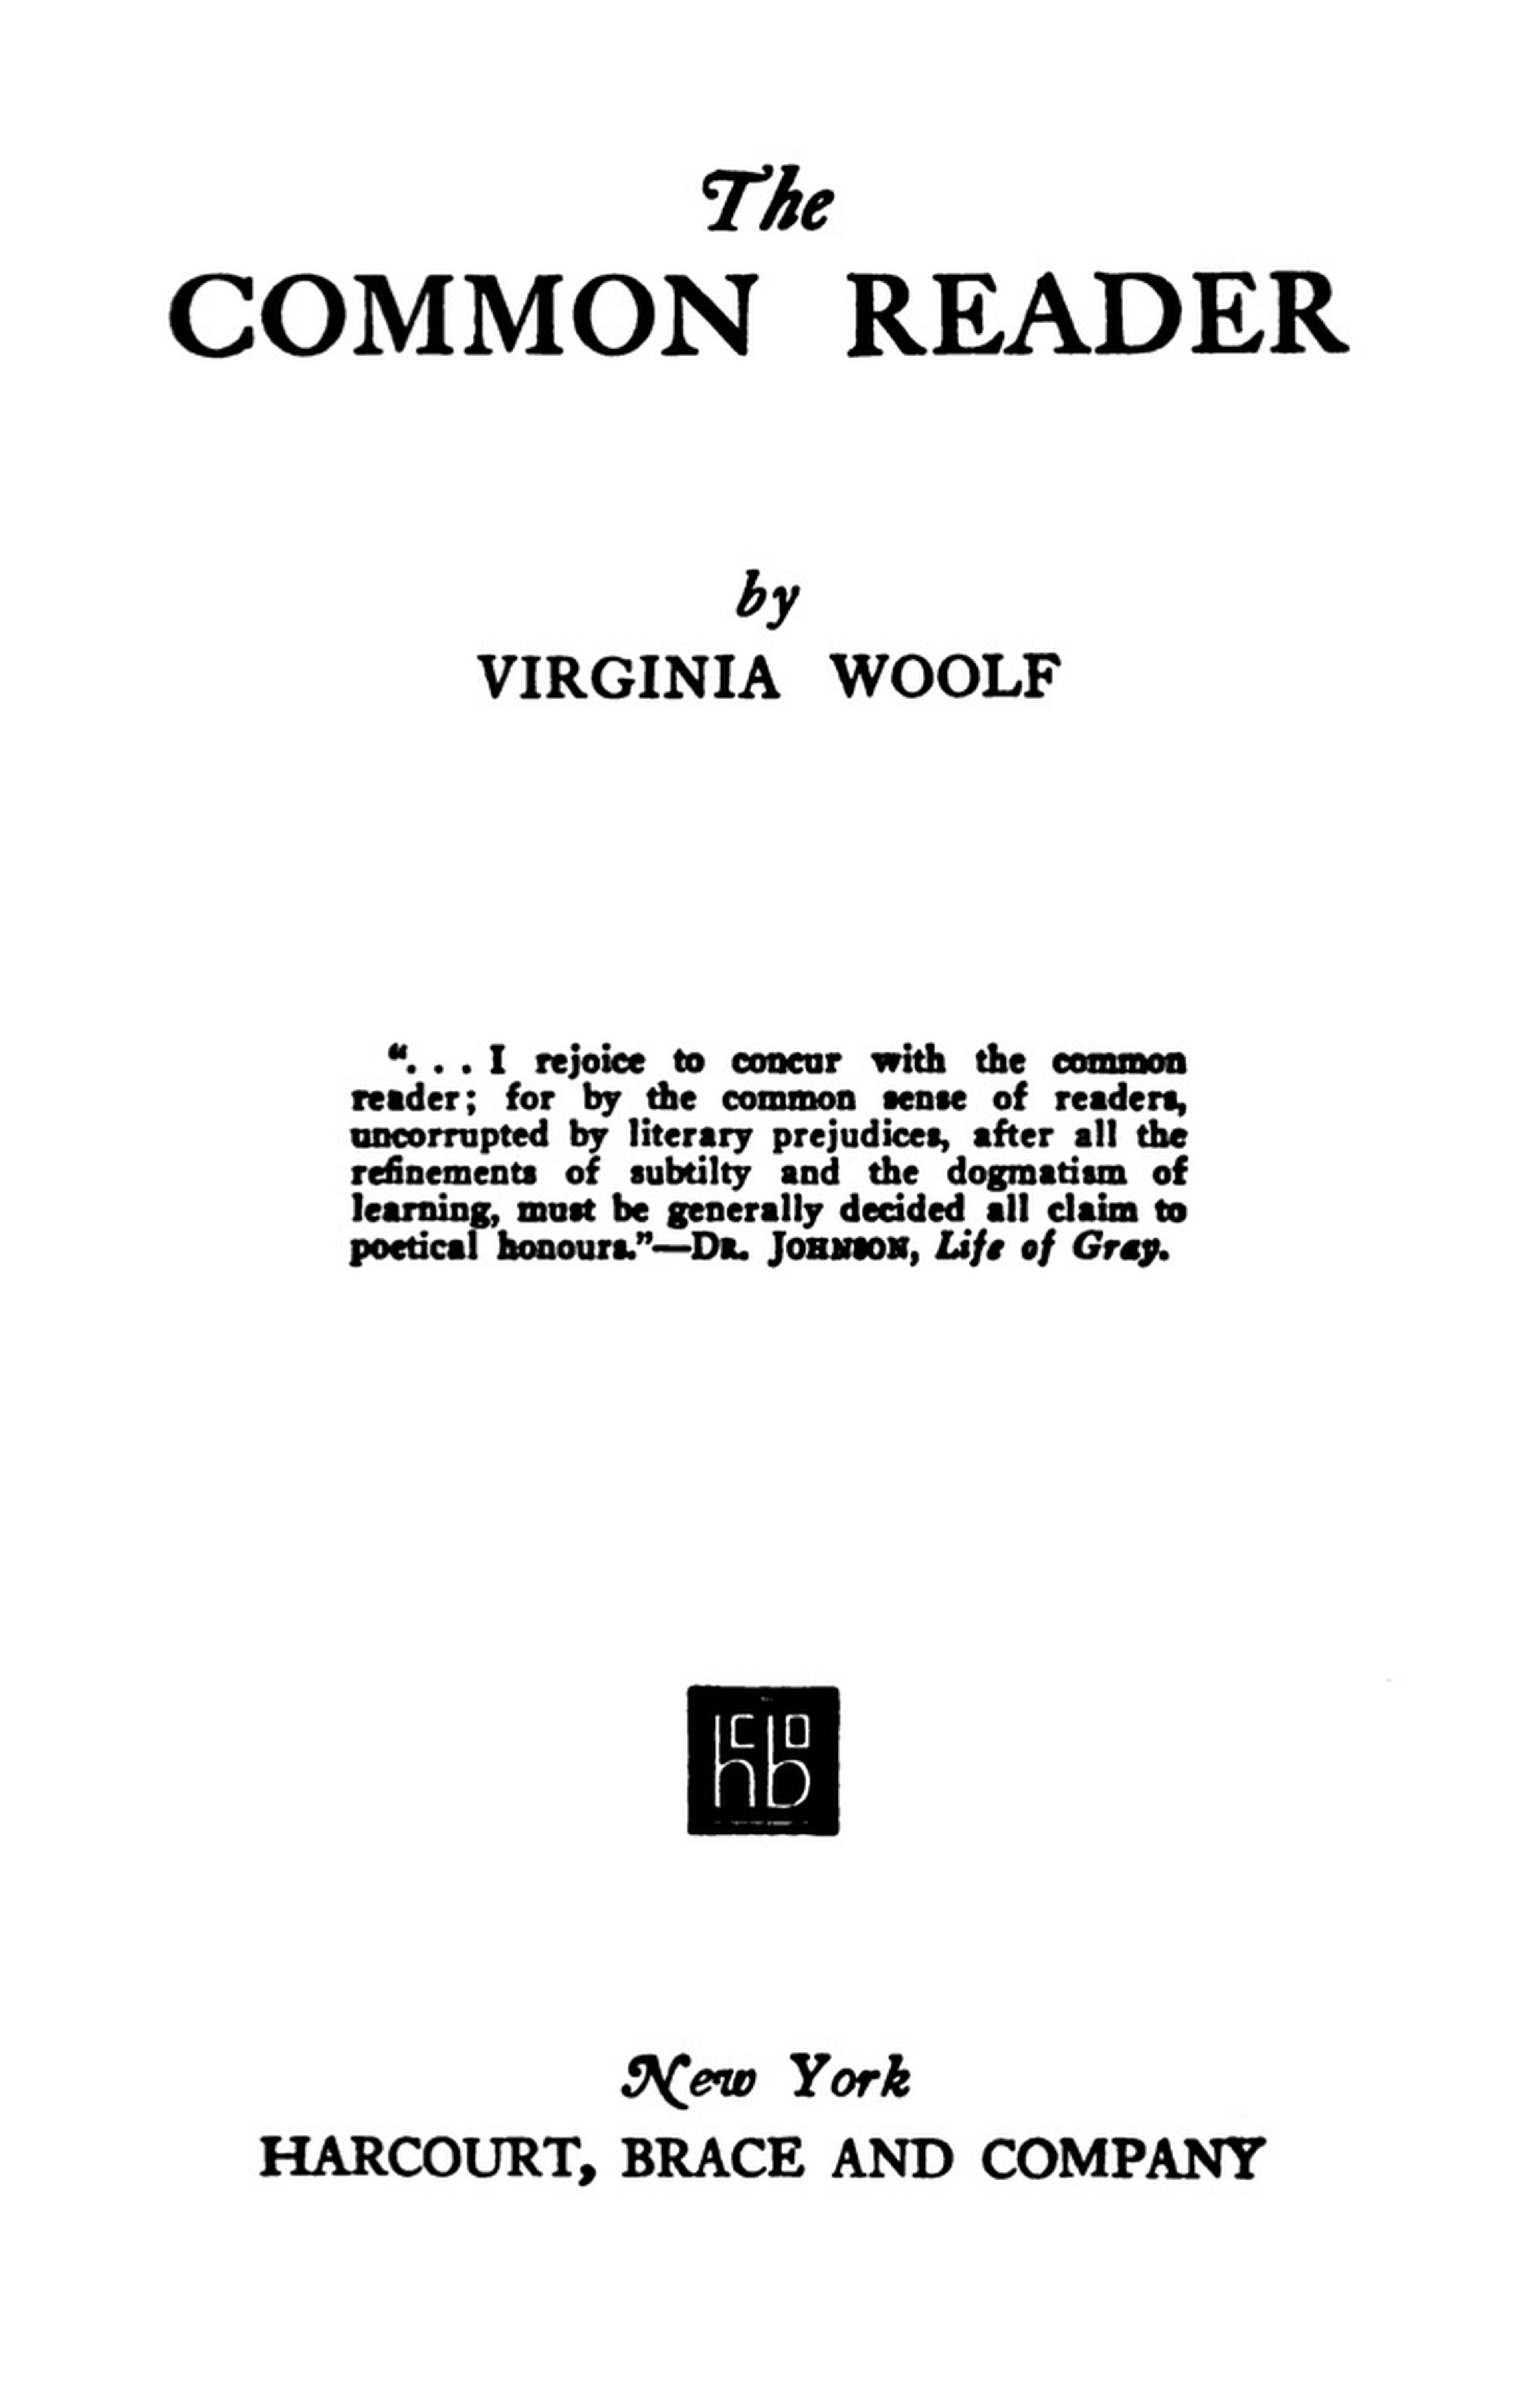 The Project Gutenberg eBook of Ashes, The Common Reader, by Virginia Woolf.